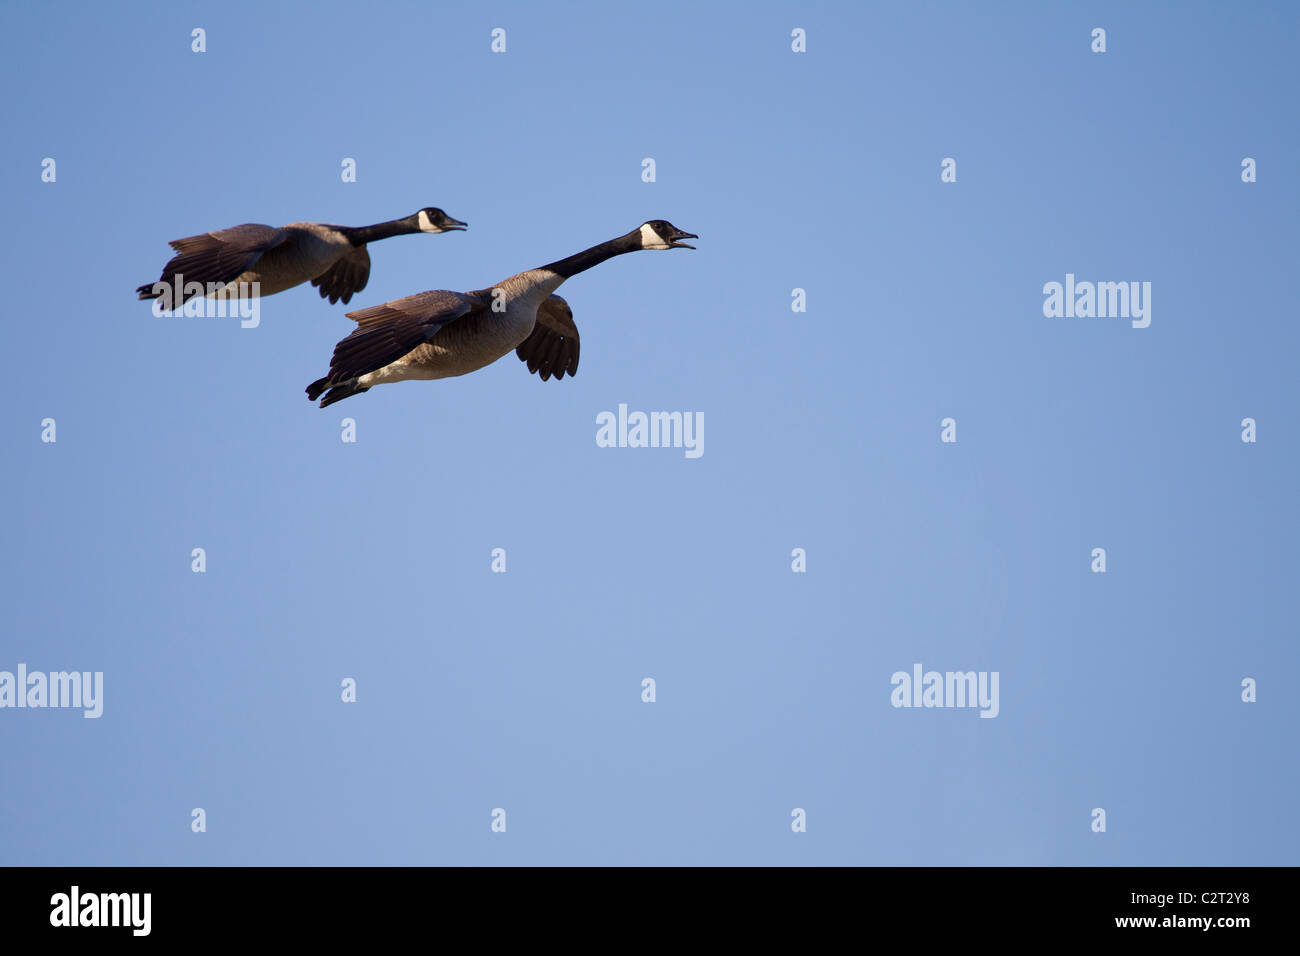 Two Canada geese in descending flight with cupped wings. Stock Photo